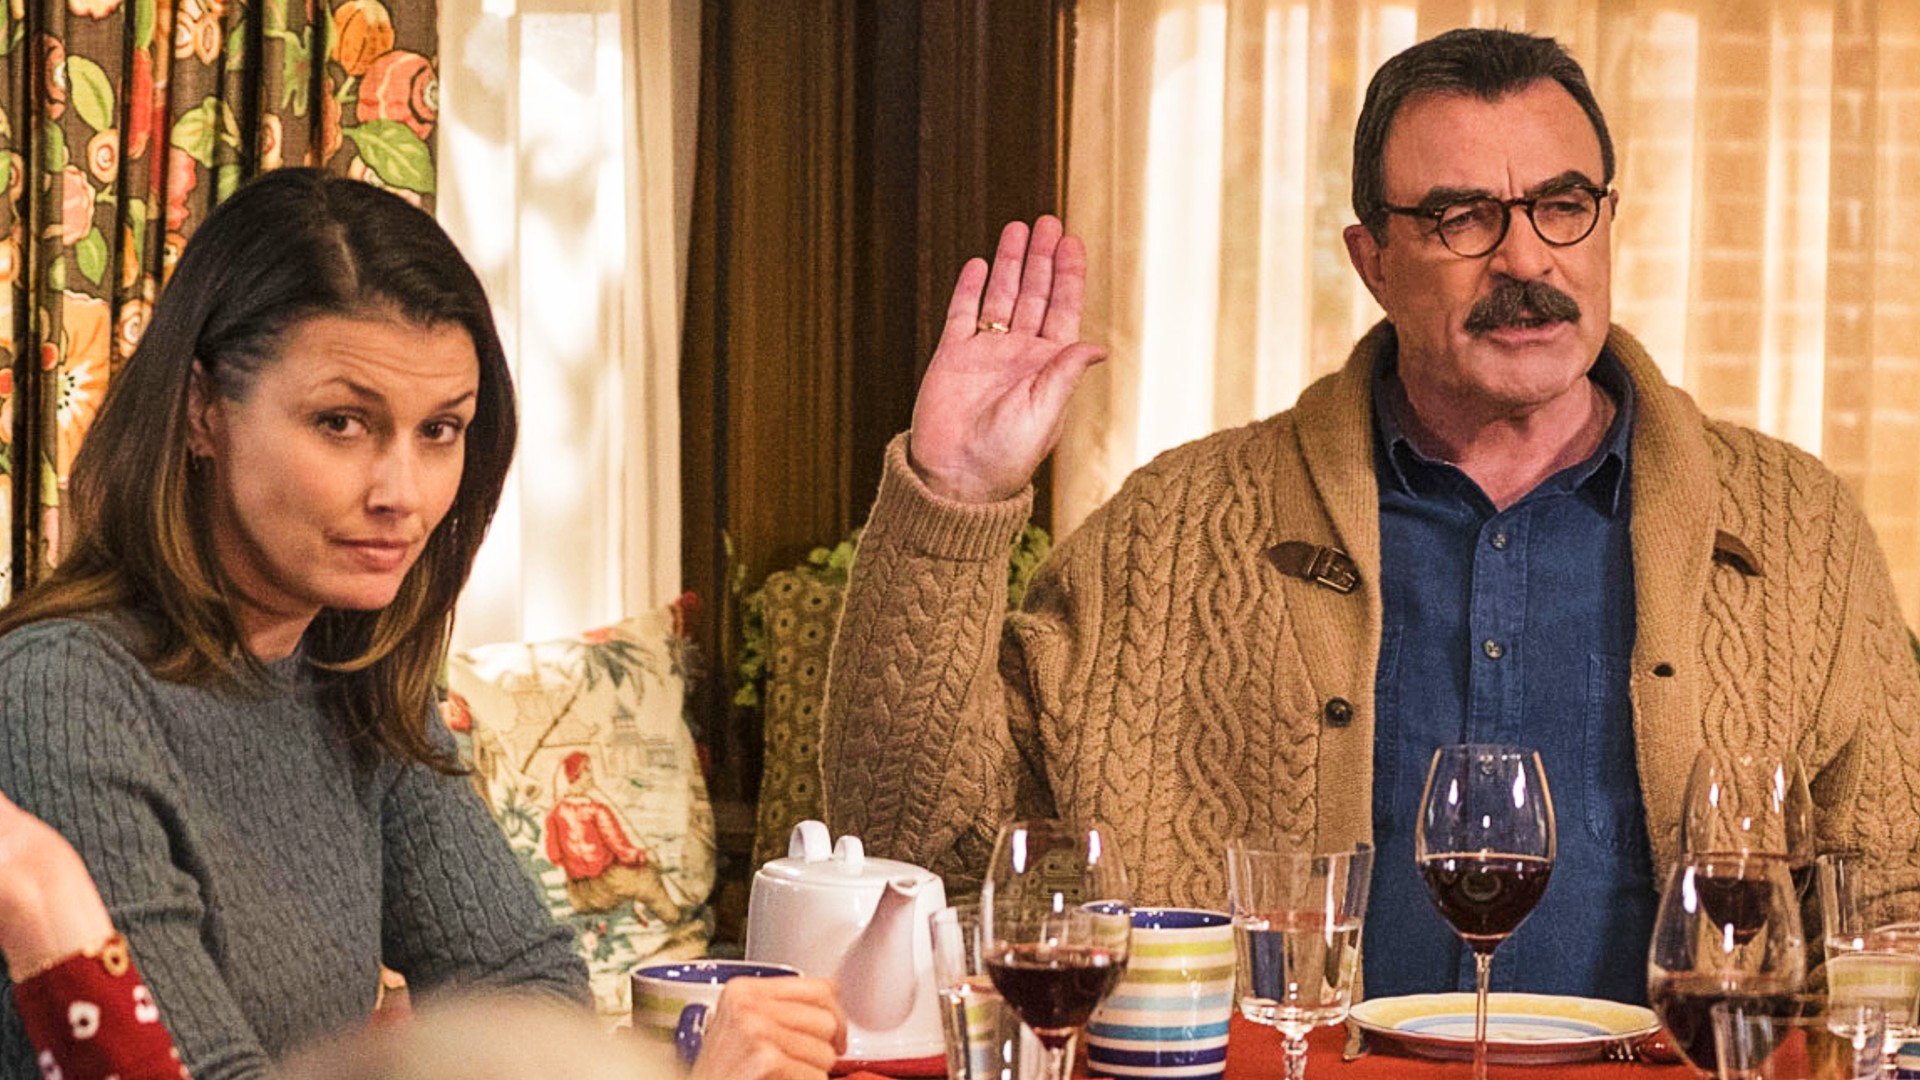 Blue Bloods Stars Gave This Unappetizing Meal the Boot Filming Family Dinners